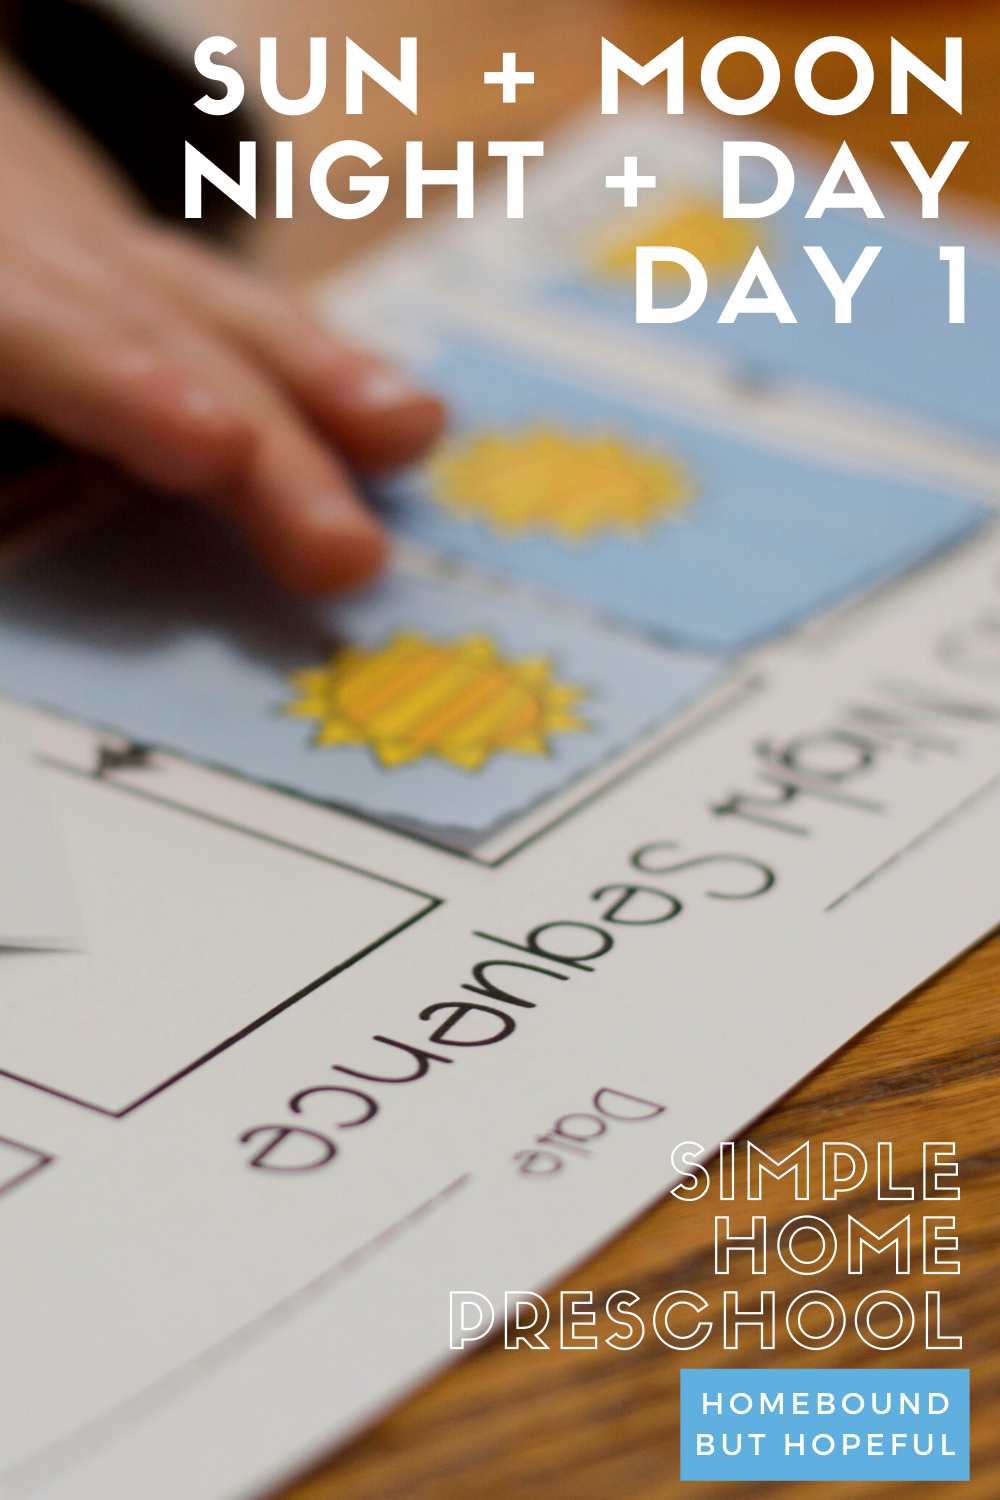 Day 1 of our easy home preschool week was spent learning about the sun. Check out the resources I gathered to engage my son in science education. #preschool #preschooler #preschoolideas #preschoolactivities